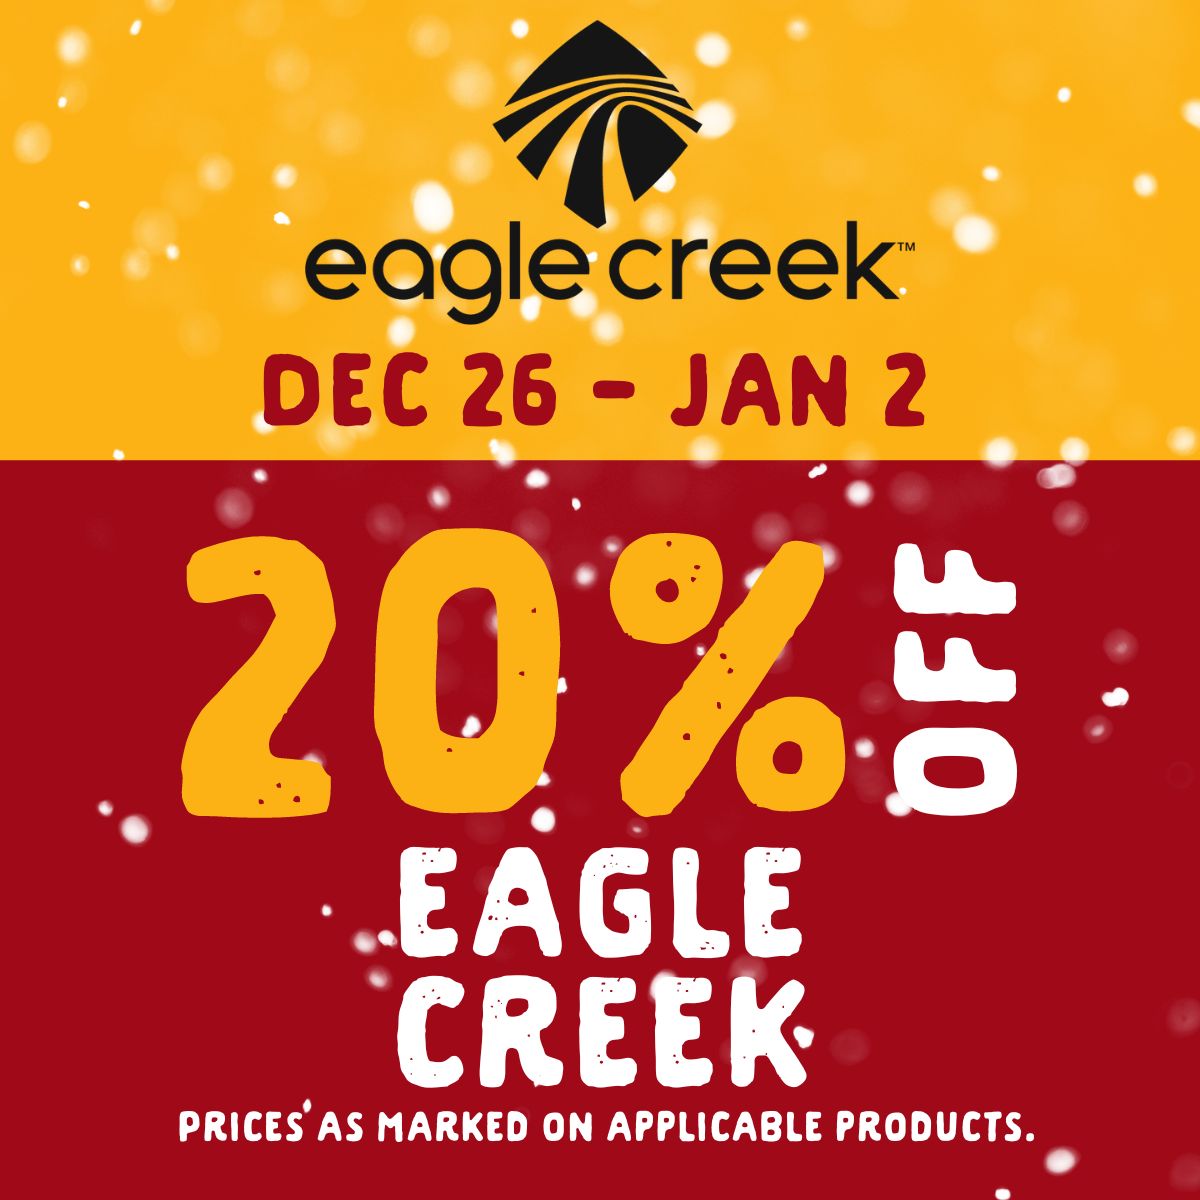 20% off Eagle Creek from December 26 until January 2. Prices as marked on applicable products.